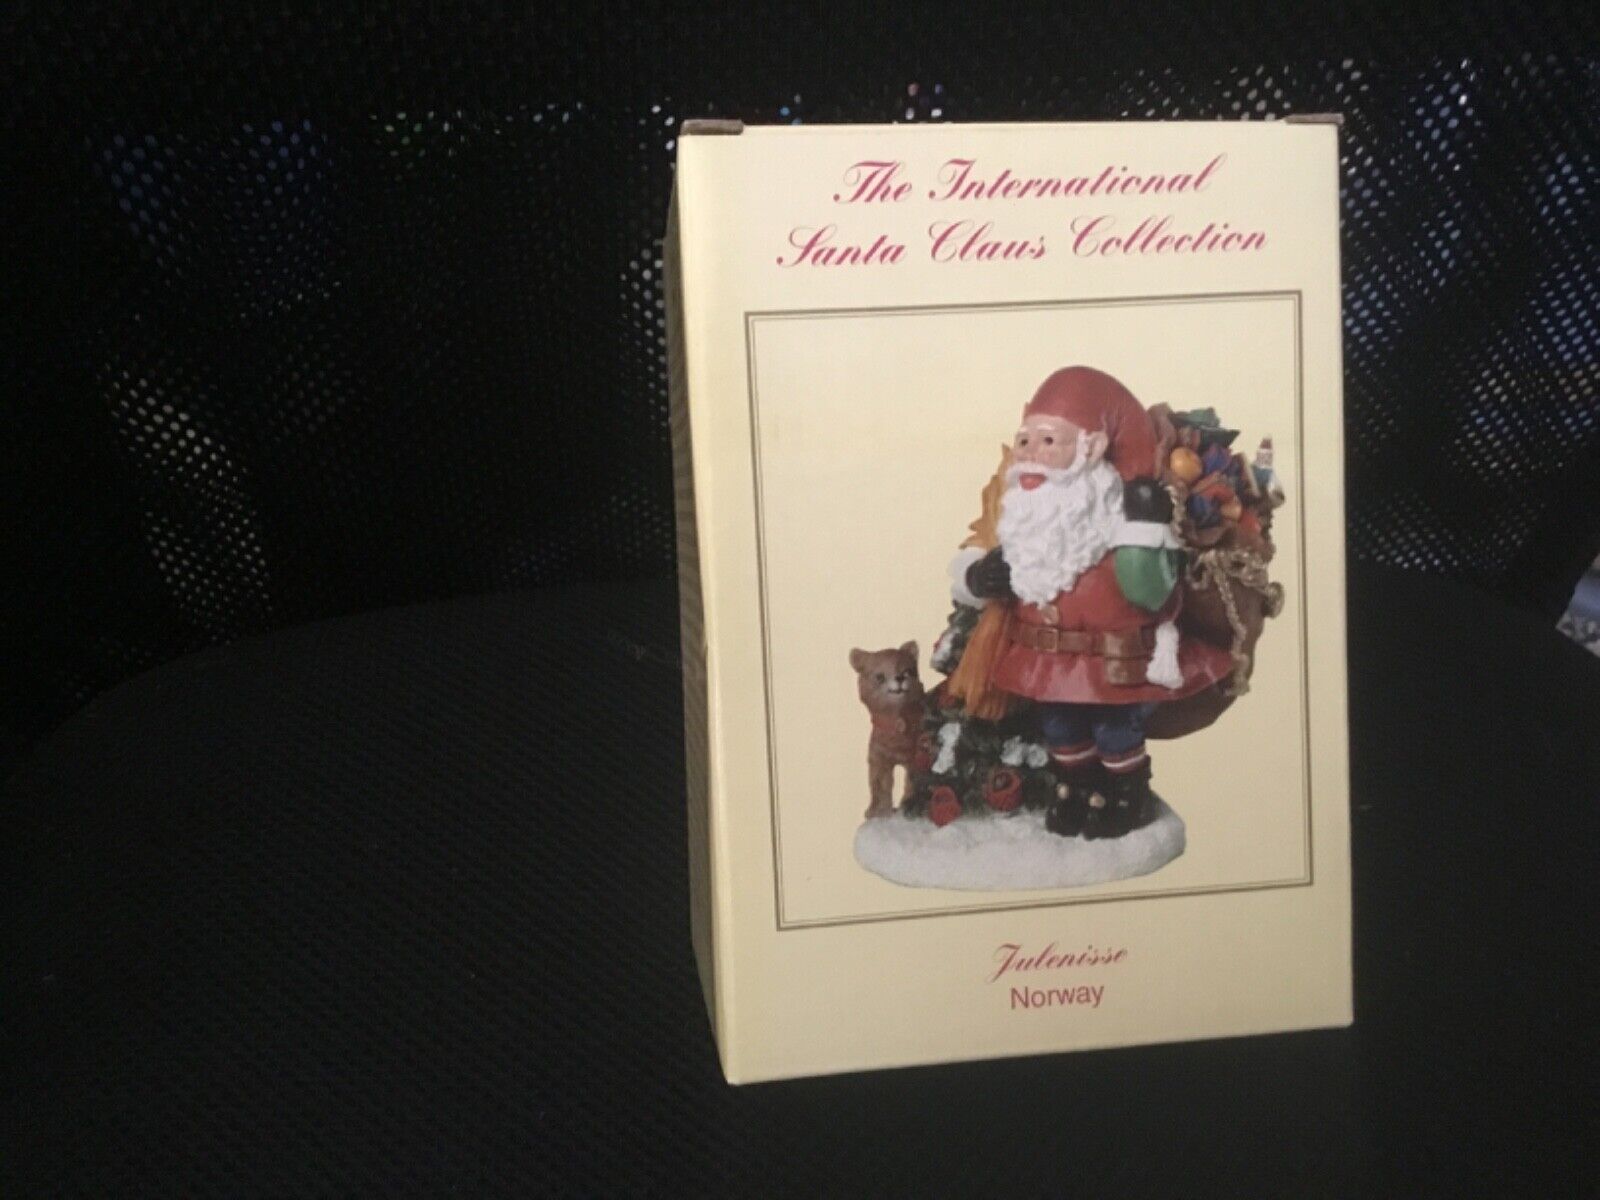 The International Santa Claus Collection Julenisse Norway 2002 SC57 Collectible